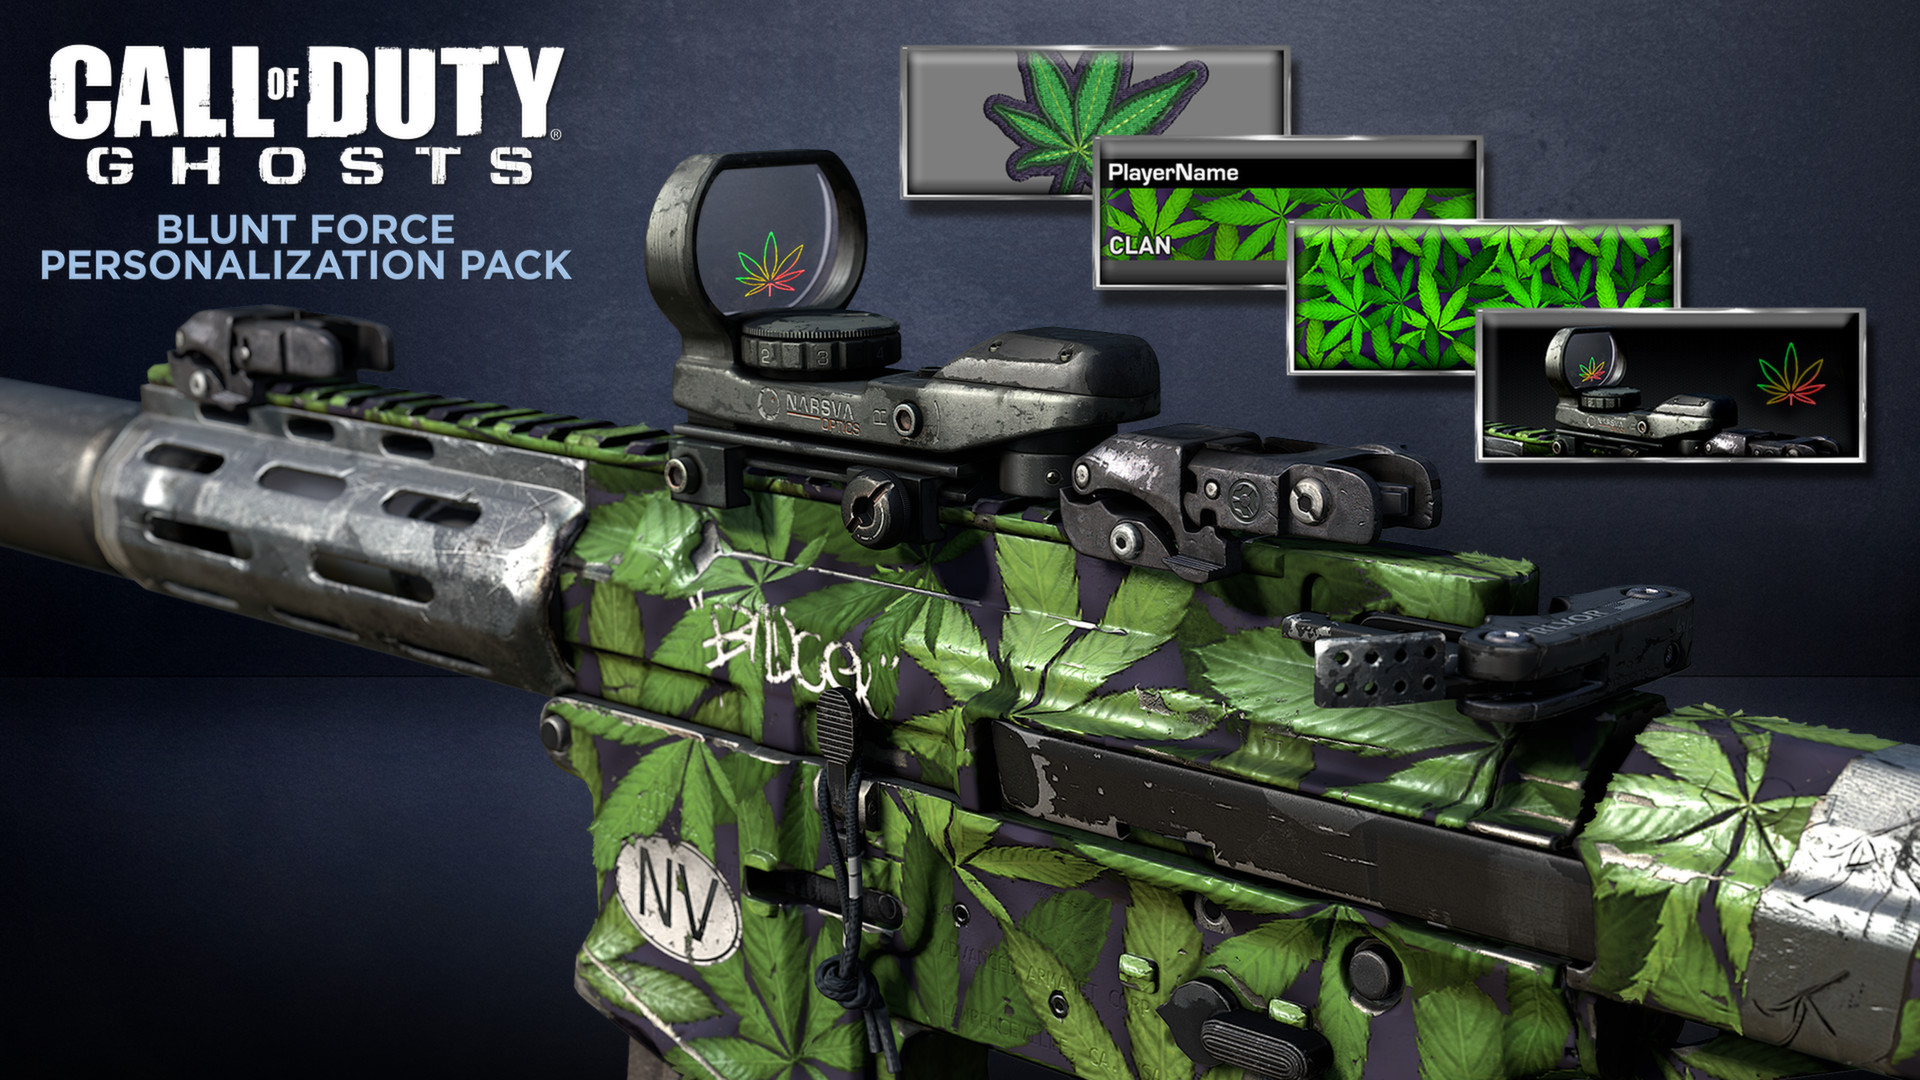 Call of Duty®: Ghosts - Blunt Force Pack Featured Screenshot #1